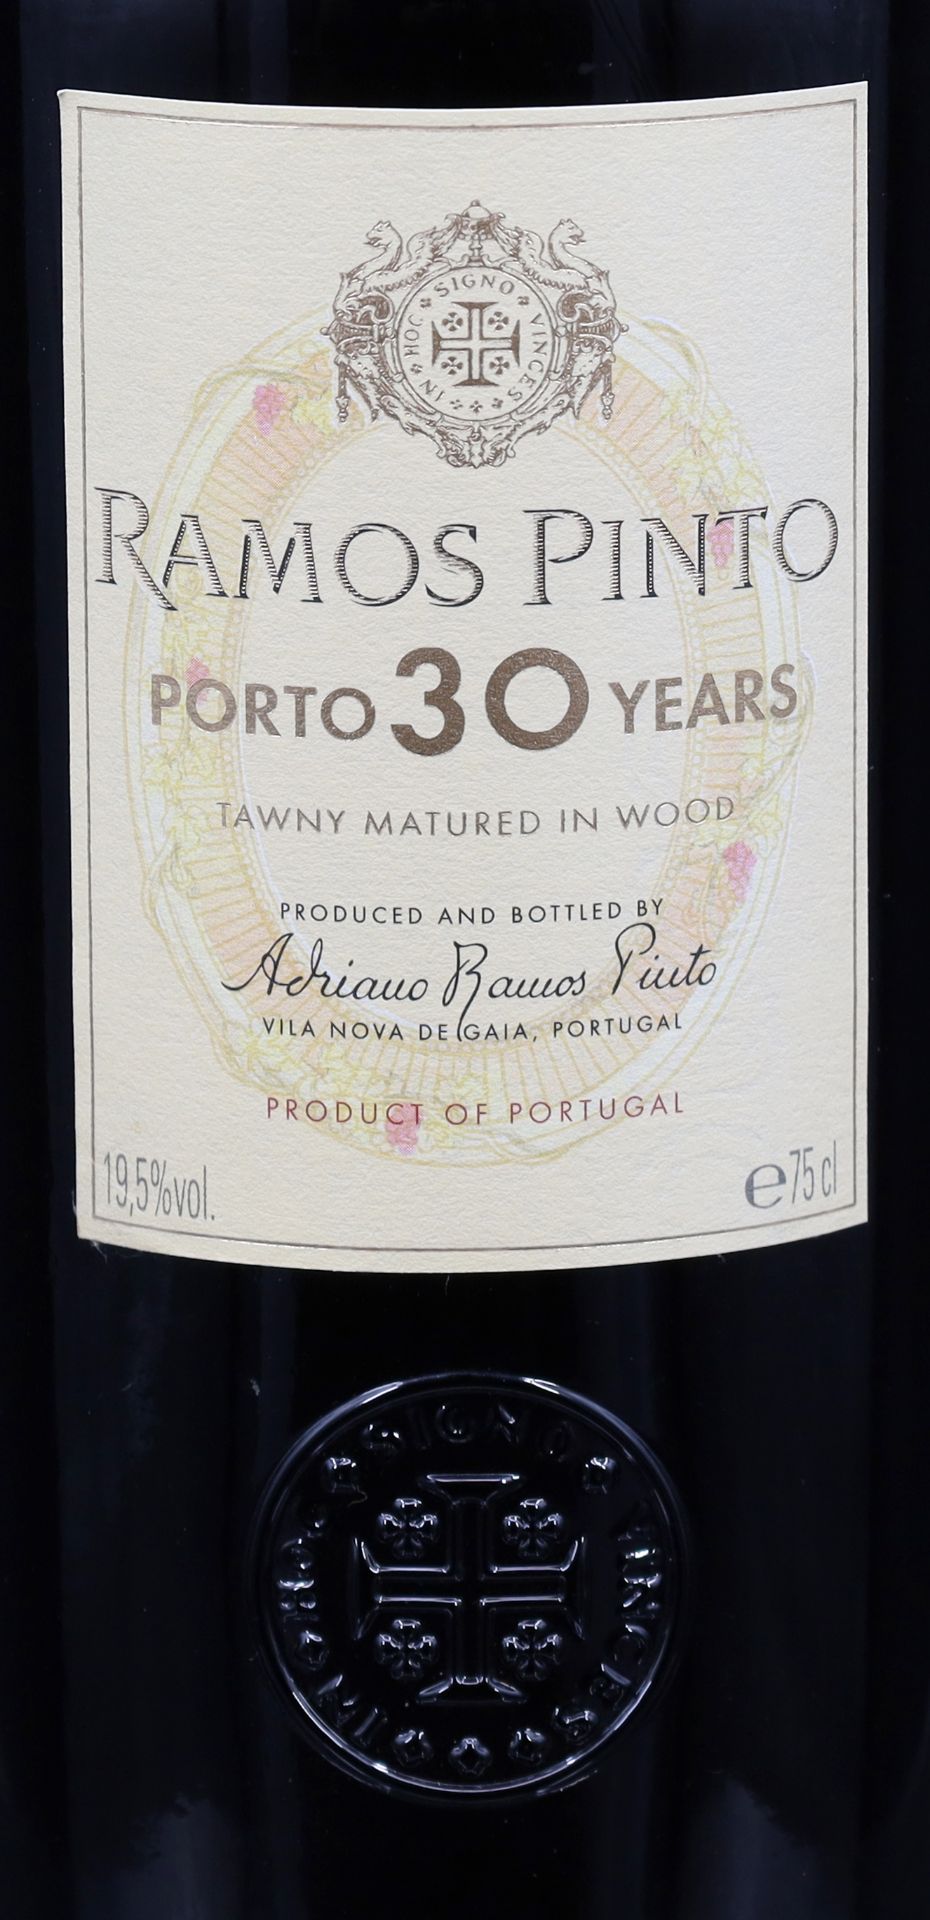 1 bottle of port wine. RAMOS PINTO. 30 years. Tawny Port. Portugal. - Image 4 of 5